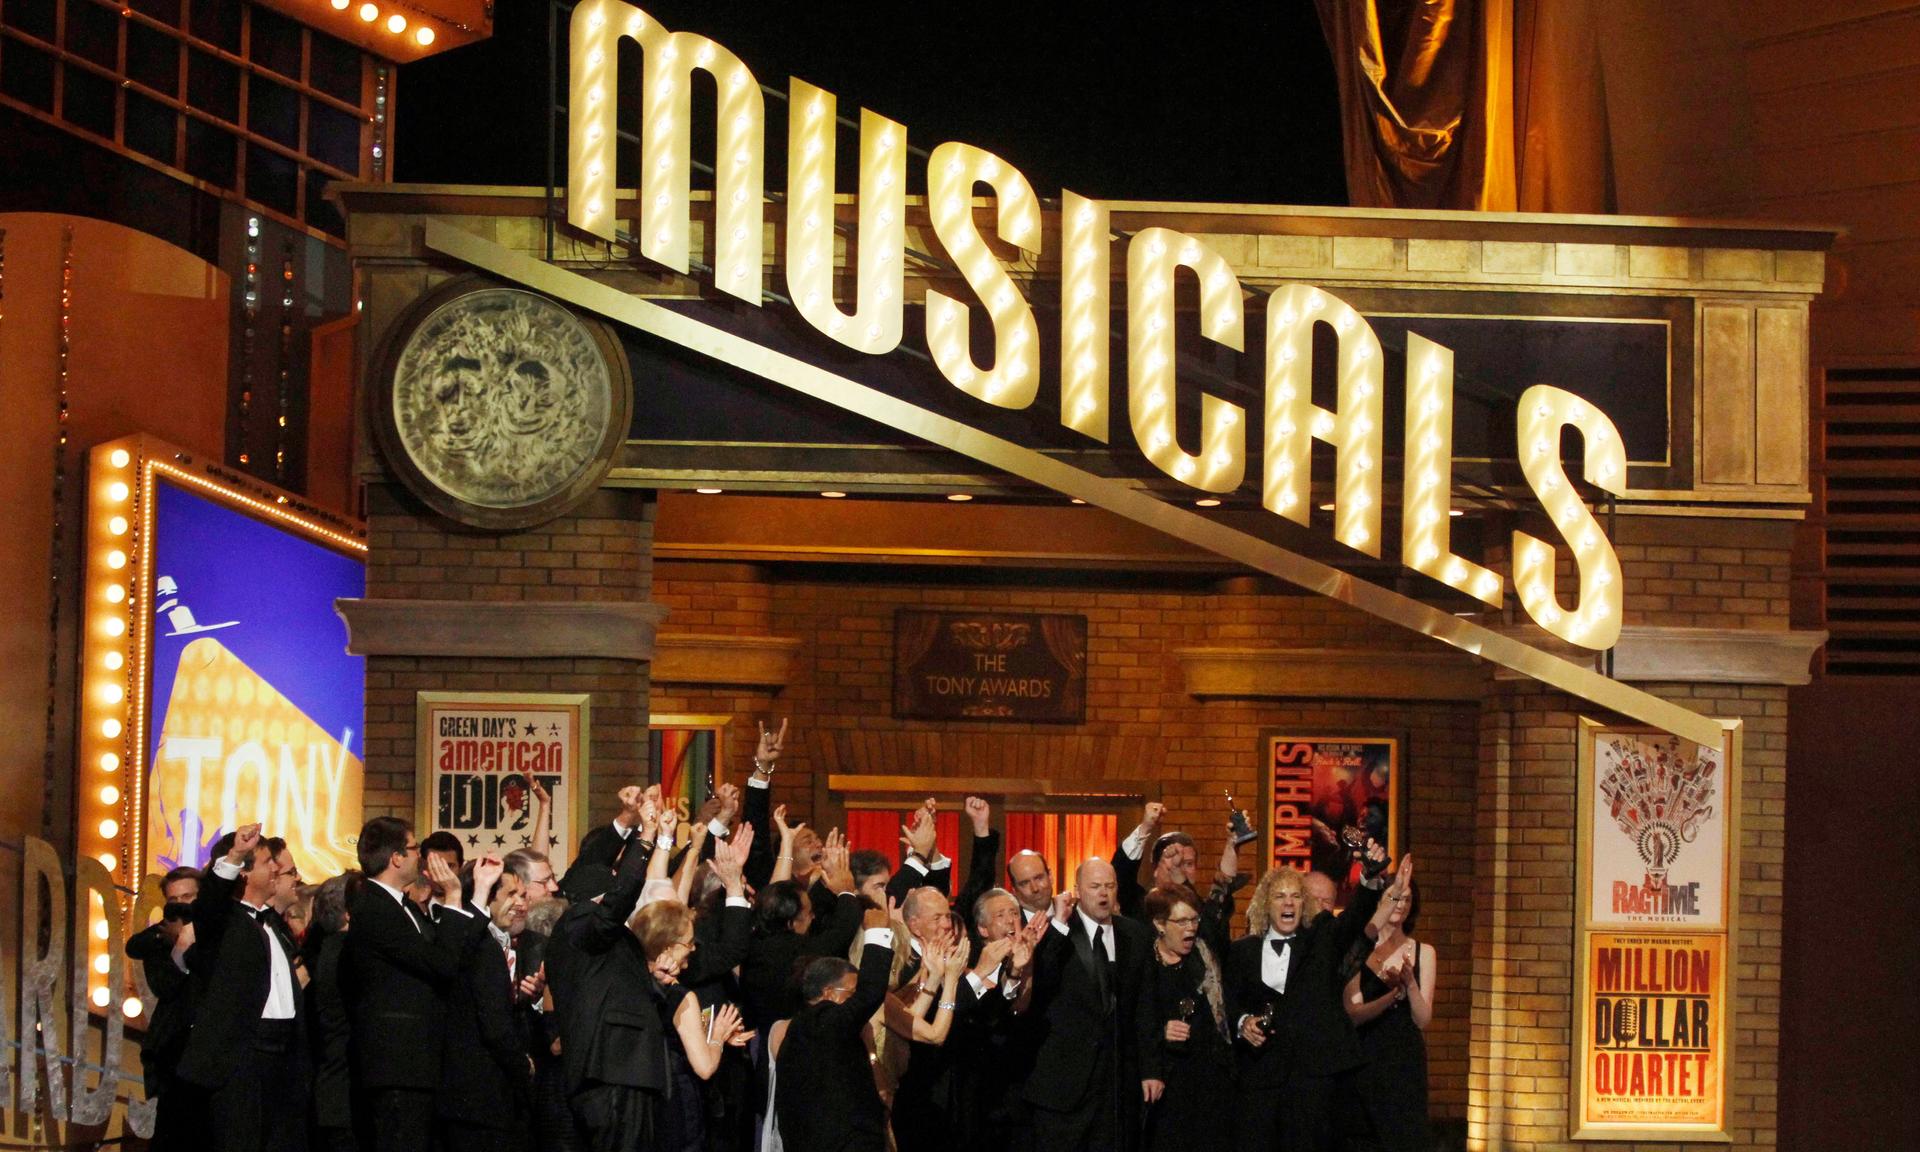 Cast members of the play "Memphis" at the 64th annual Tony Awards.